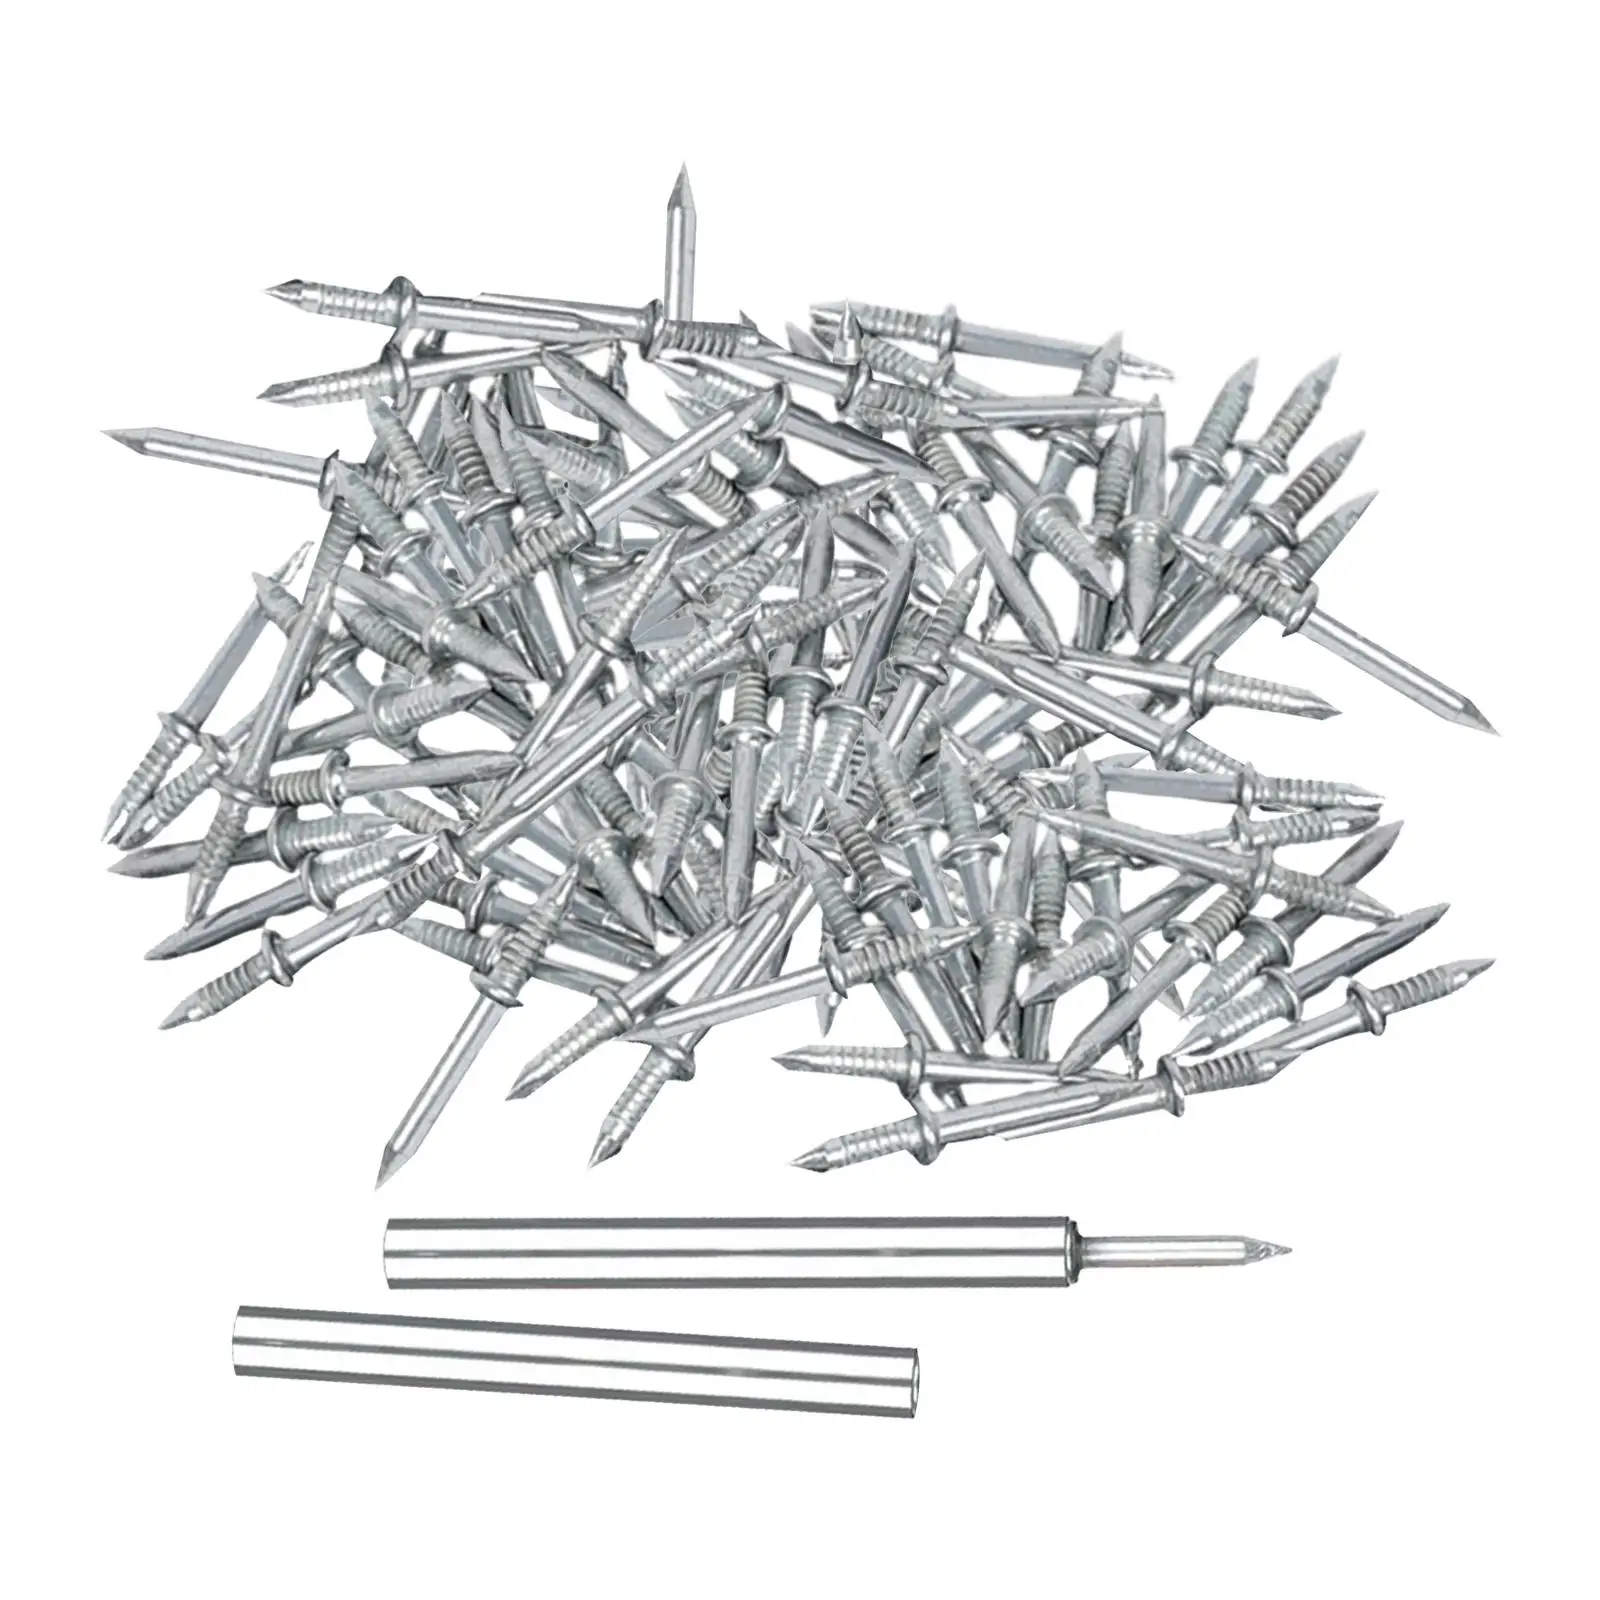 300 Pieces Double Headed Nails with Nail Specific Sleeve Tool Sofas Home Improvement Furniture Construction Chairs Seamless Nail